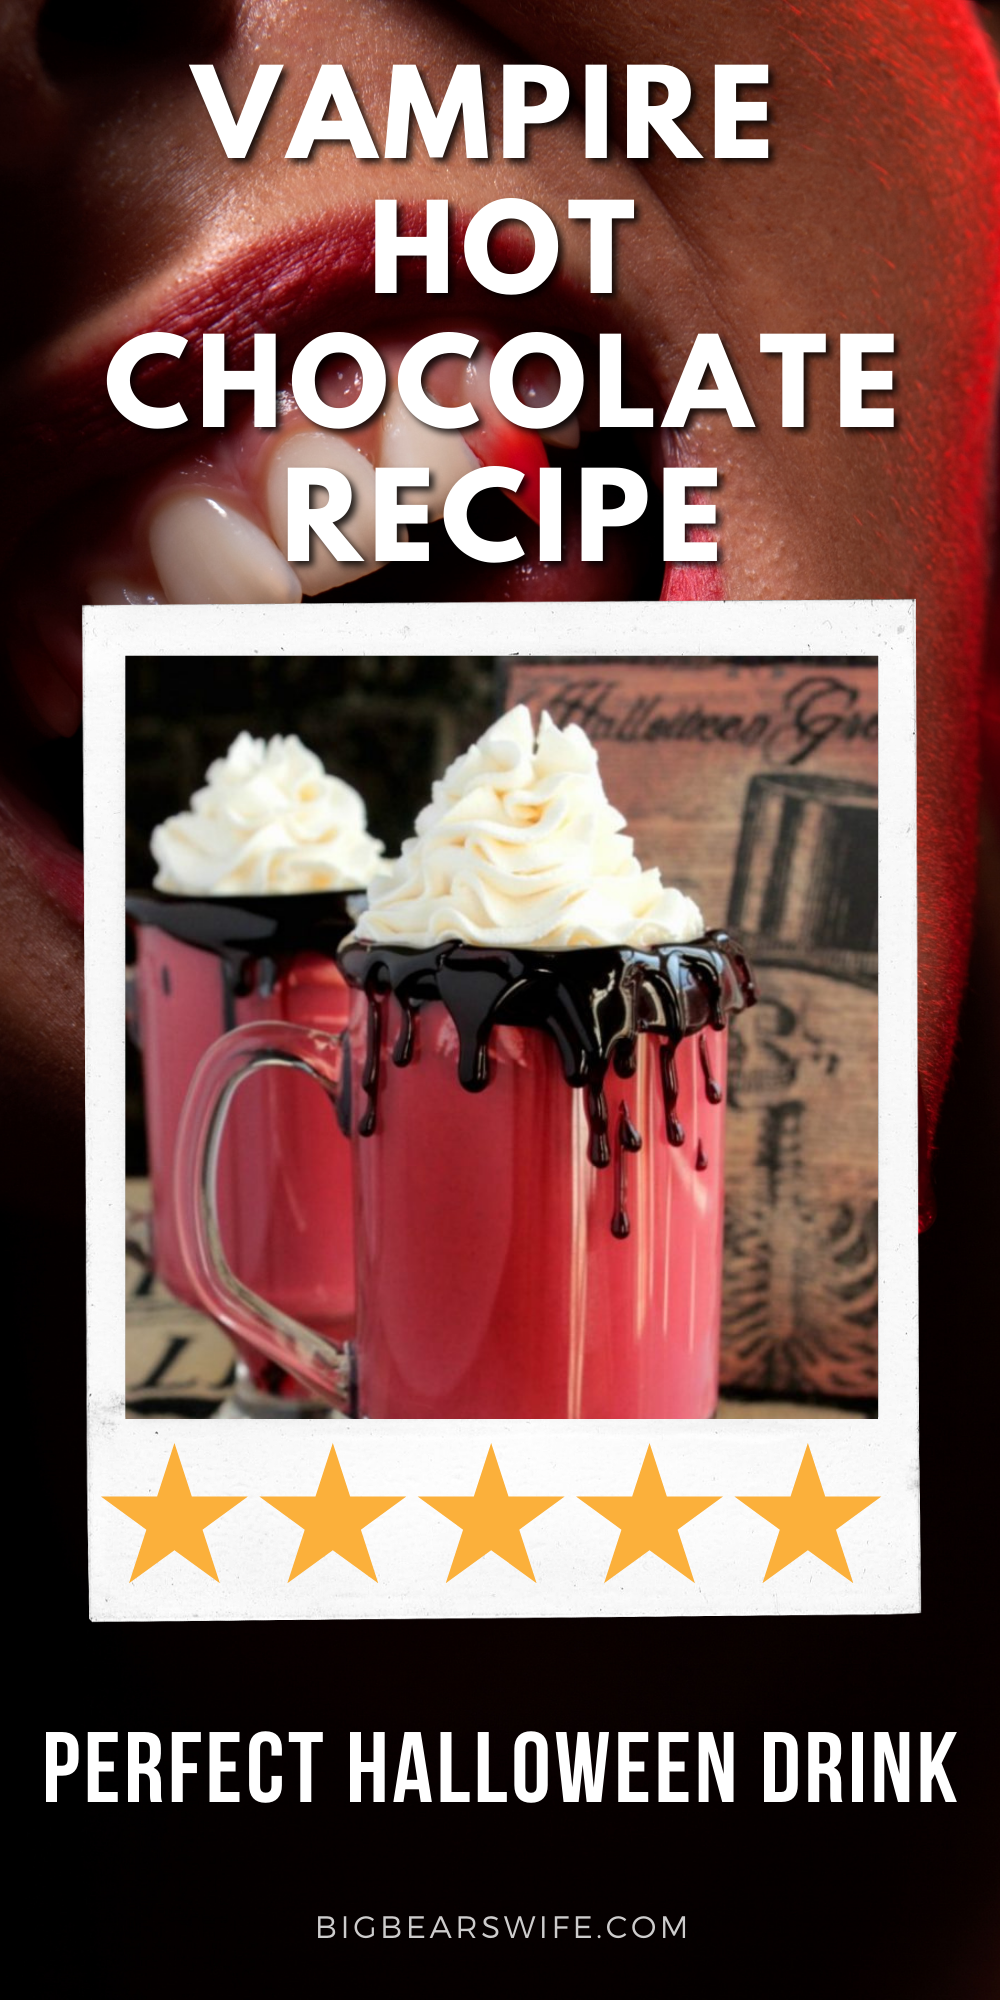 Vampire Hot Chocolate - "Some are born into sweet delight, some are born to endless nights."- William Blake. This poem line isn't directly related to vampires but it does seem to fit doesn't it. It does sound like it's perfect for this Vampire Hot Chocolate too! via @bigbearswife